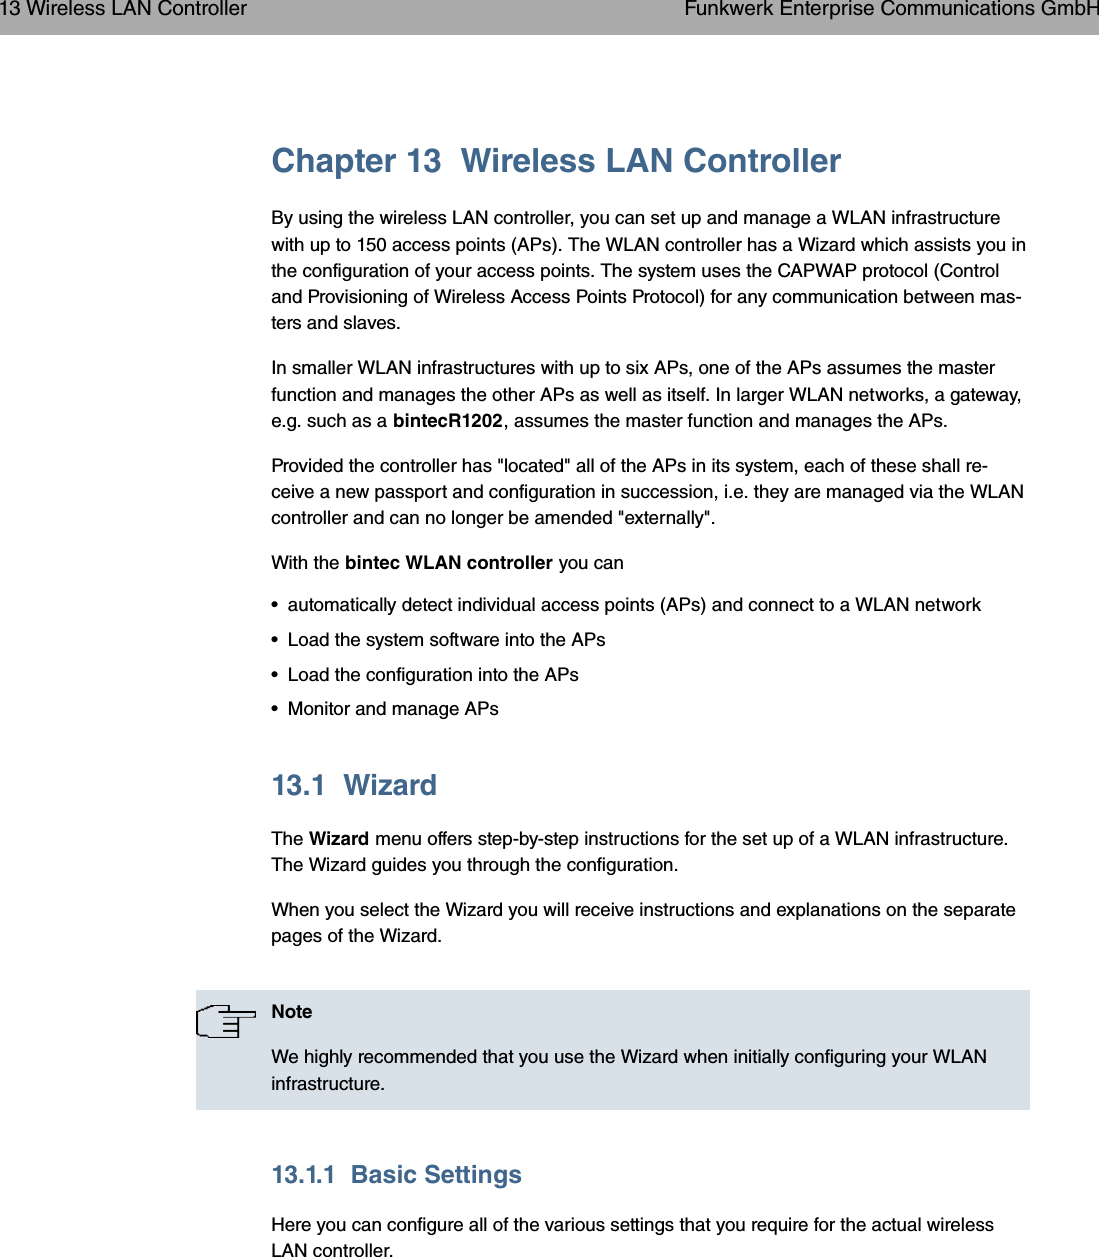 Chapter 13 Wireless LAN ControllerBy using the wireless LAN controller, you can set up and manage a WLAN infrastructurewith up to 150 access points (APs). The WLAN controller has a Wizard which assists you inthe configuration of your access points. The system uses the CAPWAP protocol (Controland Provisioning of Wireless Access Points Protocol) for any communication between mas-ters and slaves.In smaller WLAN infrastructures with up to six APs, one of the APs assumes the masterfunction and manages the other APs as well as itself. In larger WLAN networks, a gateway,e.g. such as a bintecR1202, assumes the master function and manages the APs.Provided the controller has &quot;located&quot; all of the APs in its system, each of these shall re-ceive a new passport and configuration in succession, i.e. they are managed via the WLANcontroller and can no longer be amended &quot;externally&quot;.With the bintec WLAN controller you can• automatically detect individual access points (APs) and connect to a WLAN network• Load the system software into the APs• Load the configuration into the APs• Monitor and manage APs13.1 WizardThe Wizard menu offers step-by-step instructions for the set up of a WLAN infrastructure.The Wizard guides you through the configuration.When you select the Wizard you will receive instructions and explanations on the separatepages of the Wizard.NoteWe highly recommended that you use the Wizard when initially configuring your WLANinfrastructure.13.1.1 Basic SettingsHere you can configure all of the various settings that you require for the actual wirelessLAN controller.13 Wireless LAN Controller Funkwerk Enterprise Communications GmbH144 bintec WLAN and Industrial WLAN